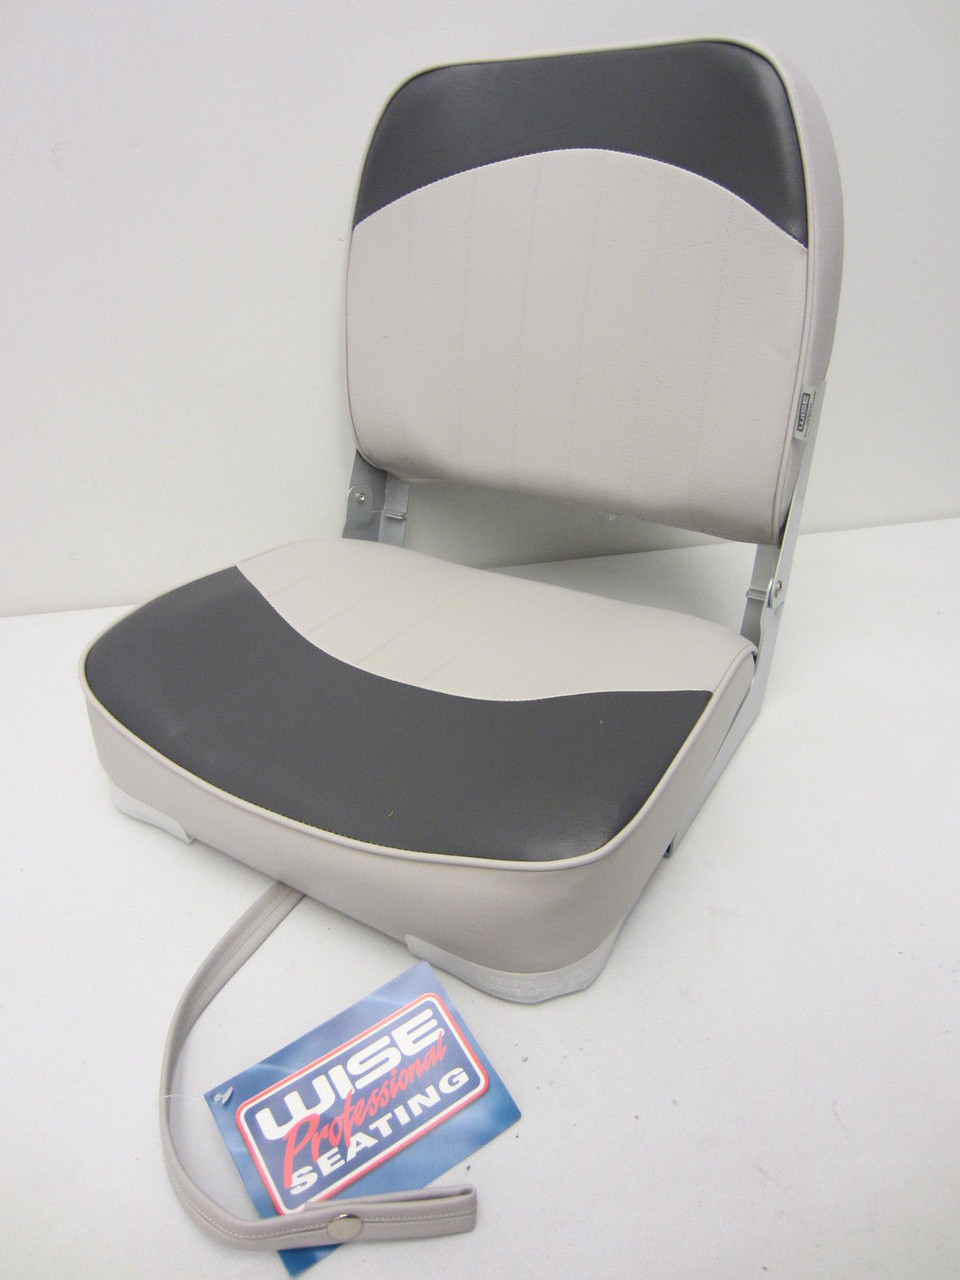 Wise New Fishing Boat Seat Chair Gray/Charcoal Composite Base/Bottom Fold Down